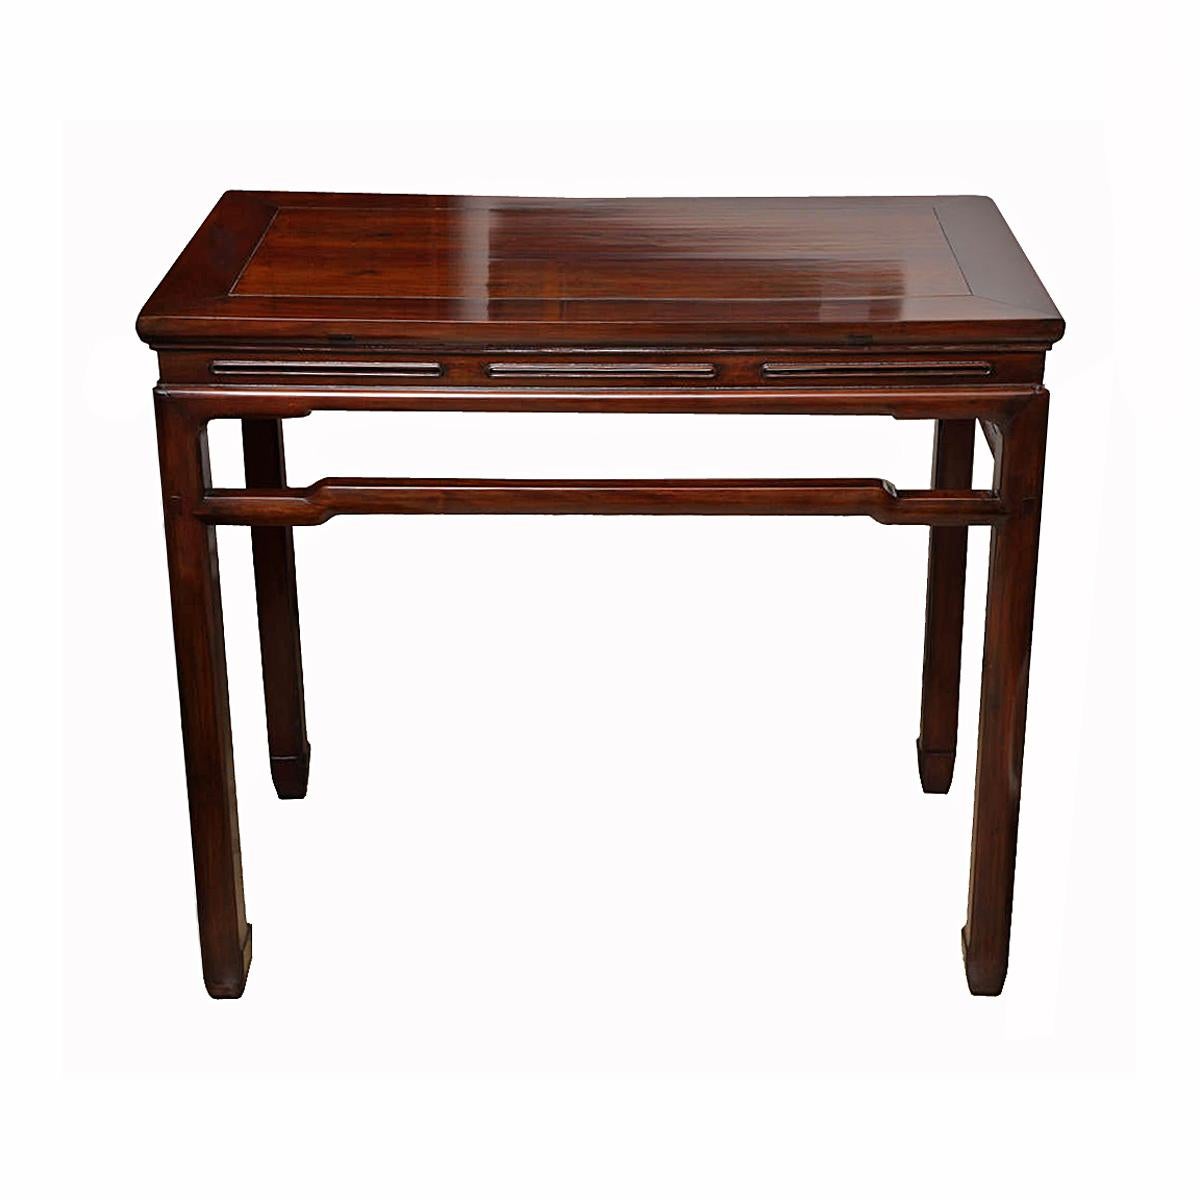 A Chinese mid-20th Century console or sofa table, with humpback stretchers and corner legs. Northern Elm wood (Jamu). A fine example of traditional Asian furniture craftsmanship, where no nails or screws are used, but a complex wood joint system.